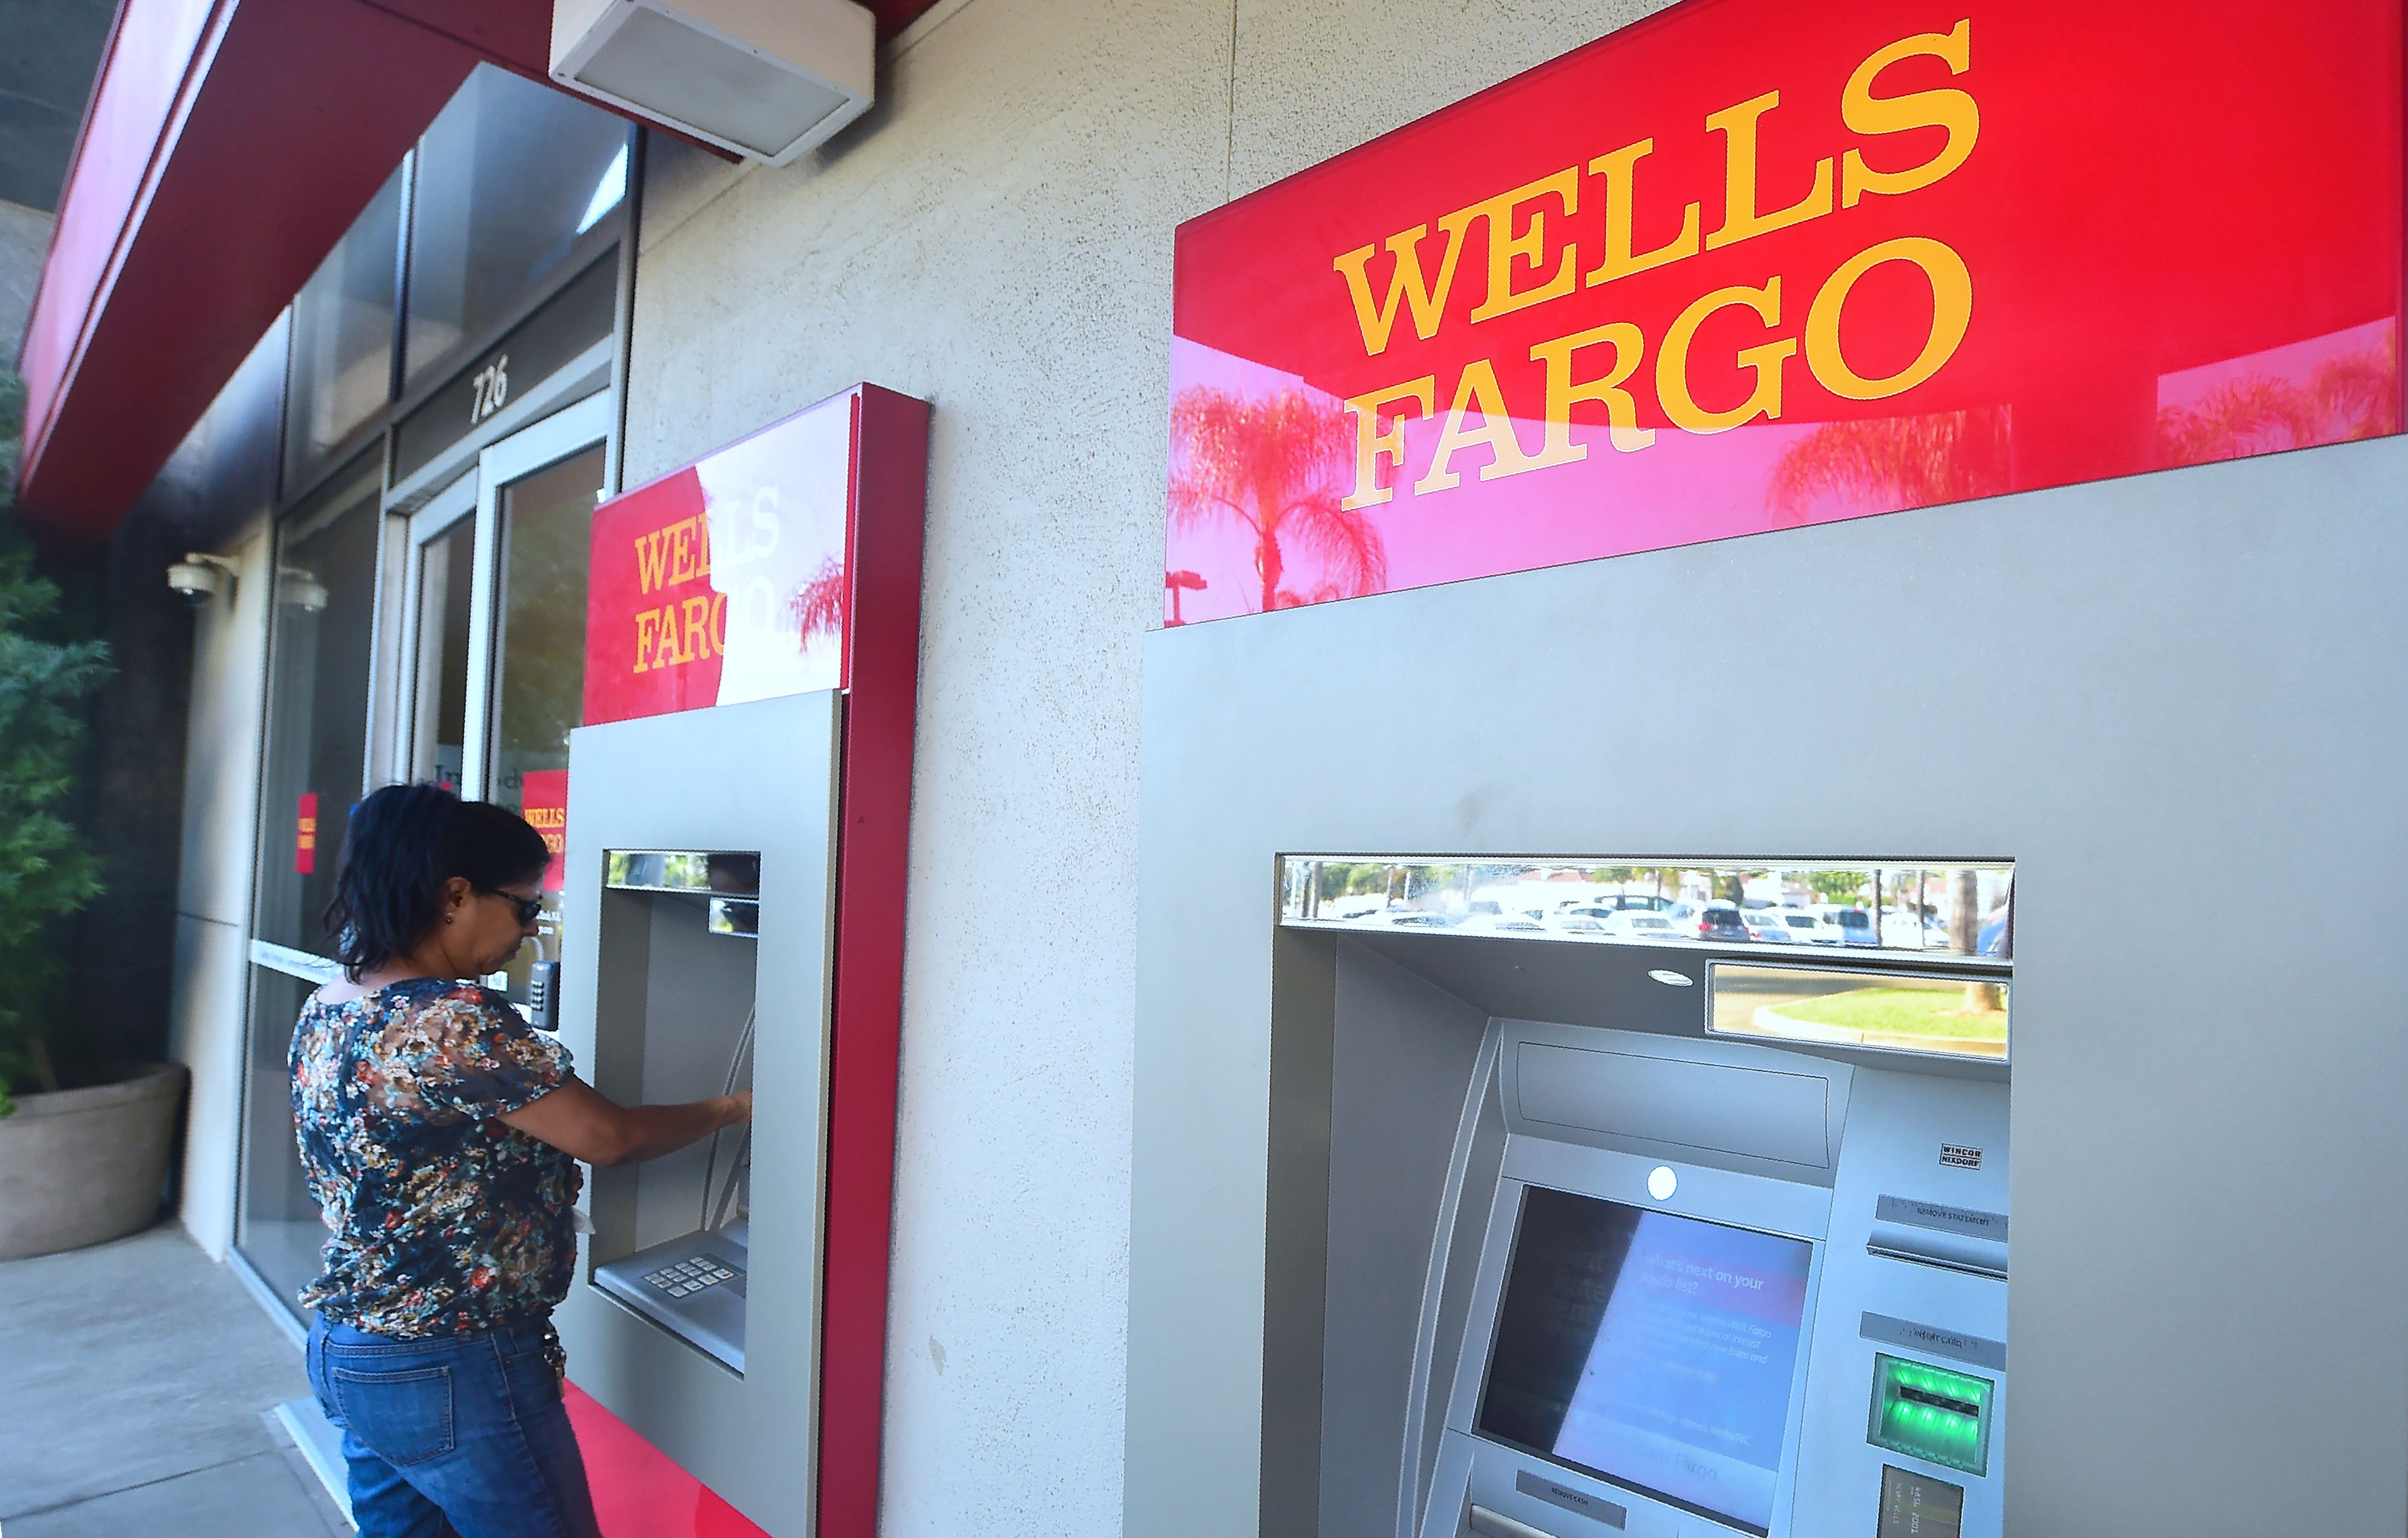 You Can Now Use Wells Fargo ATMs Without a Card